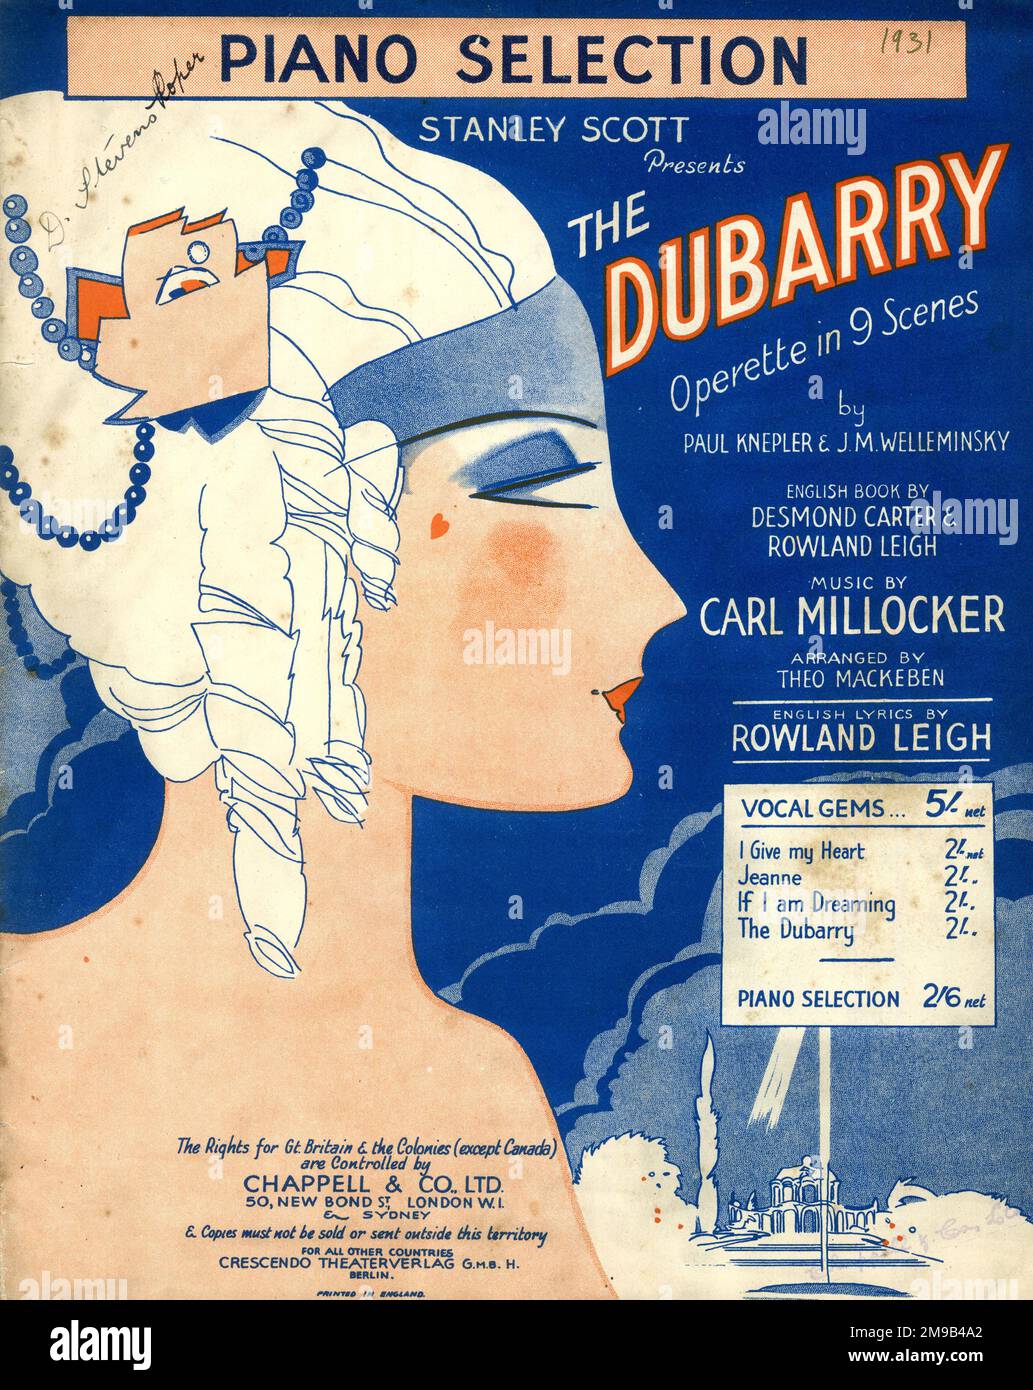 Music cover, Piano Selection, Stanley Scott presents The Dubarry, Operette in 9 Scenes, by Paul Knepler and J M Welleminsky, English book by Desmond Carter and Rowland Leigh, music by Carl Millocker, arranged by Theo Mackeben. Stock Photo